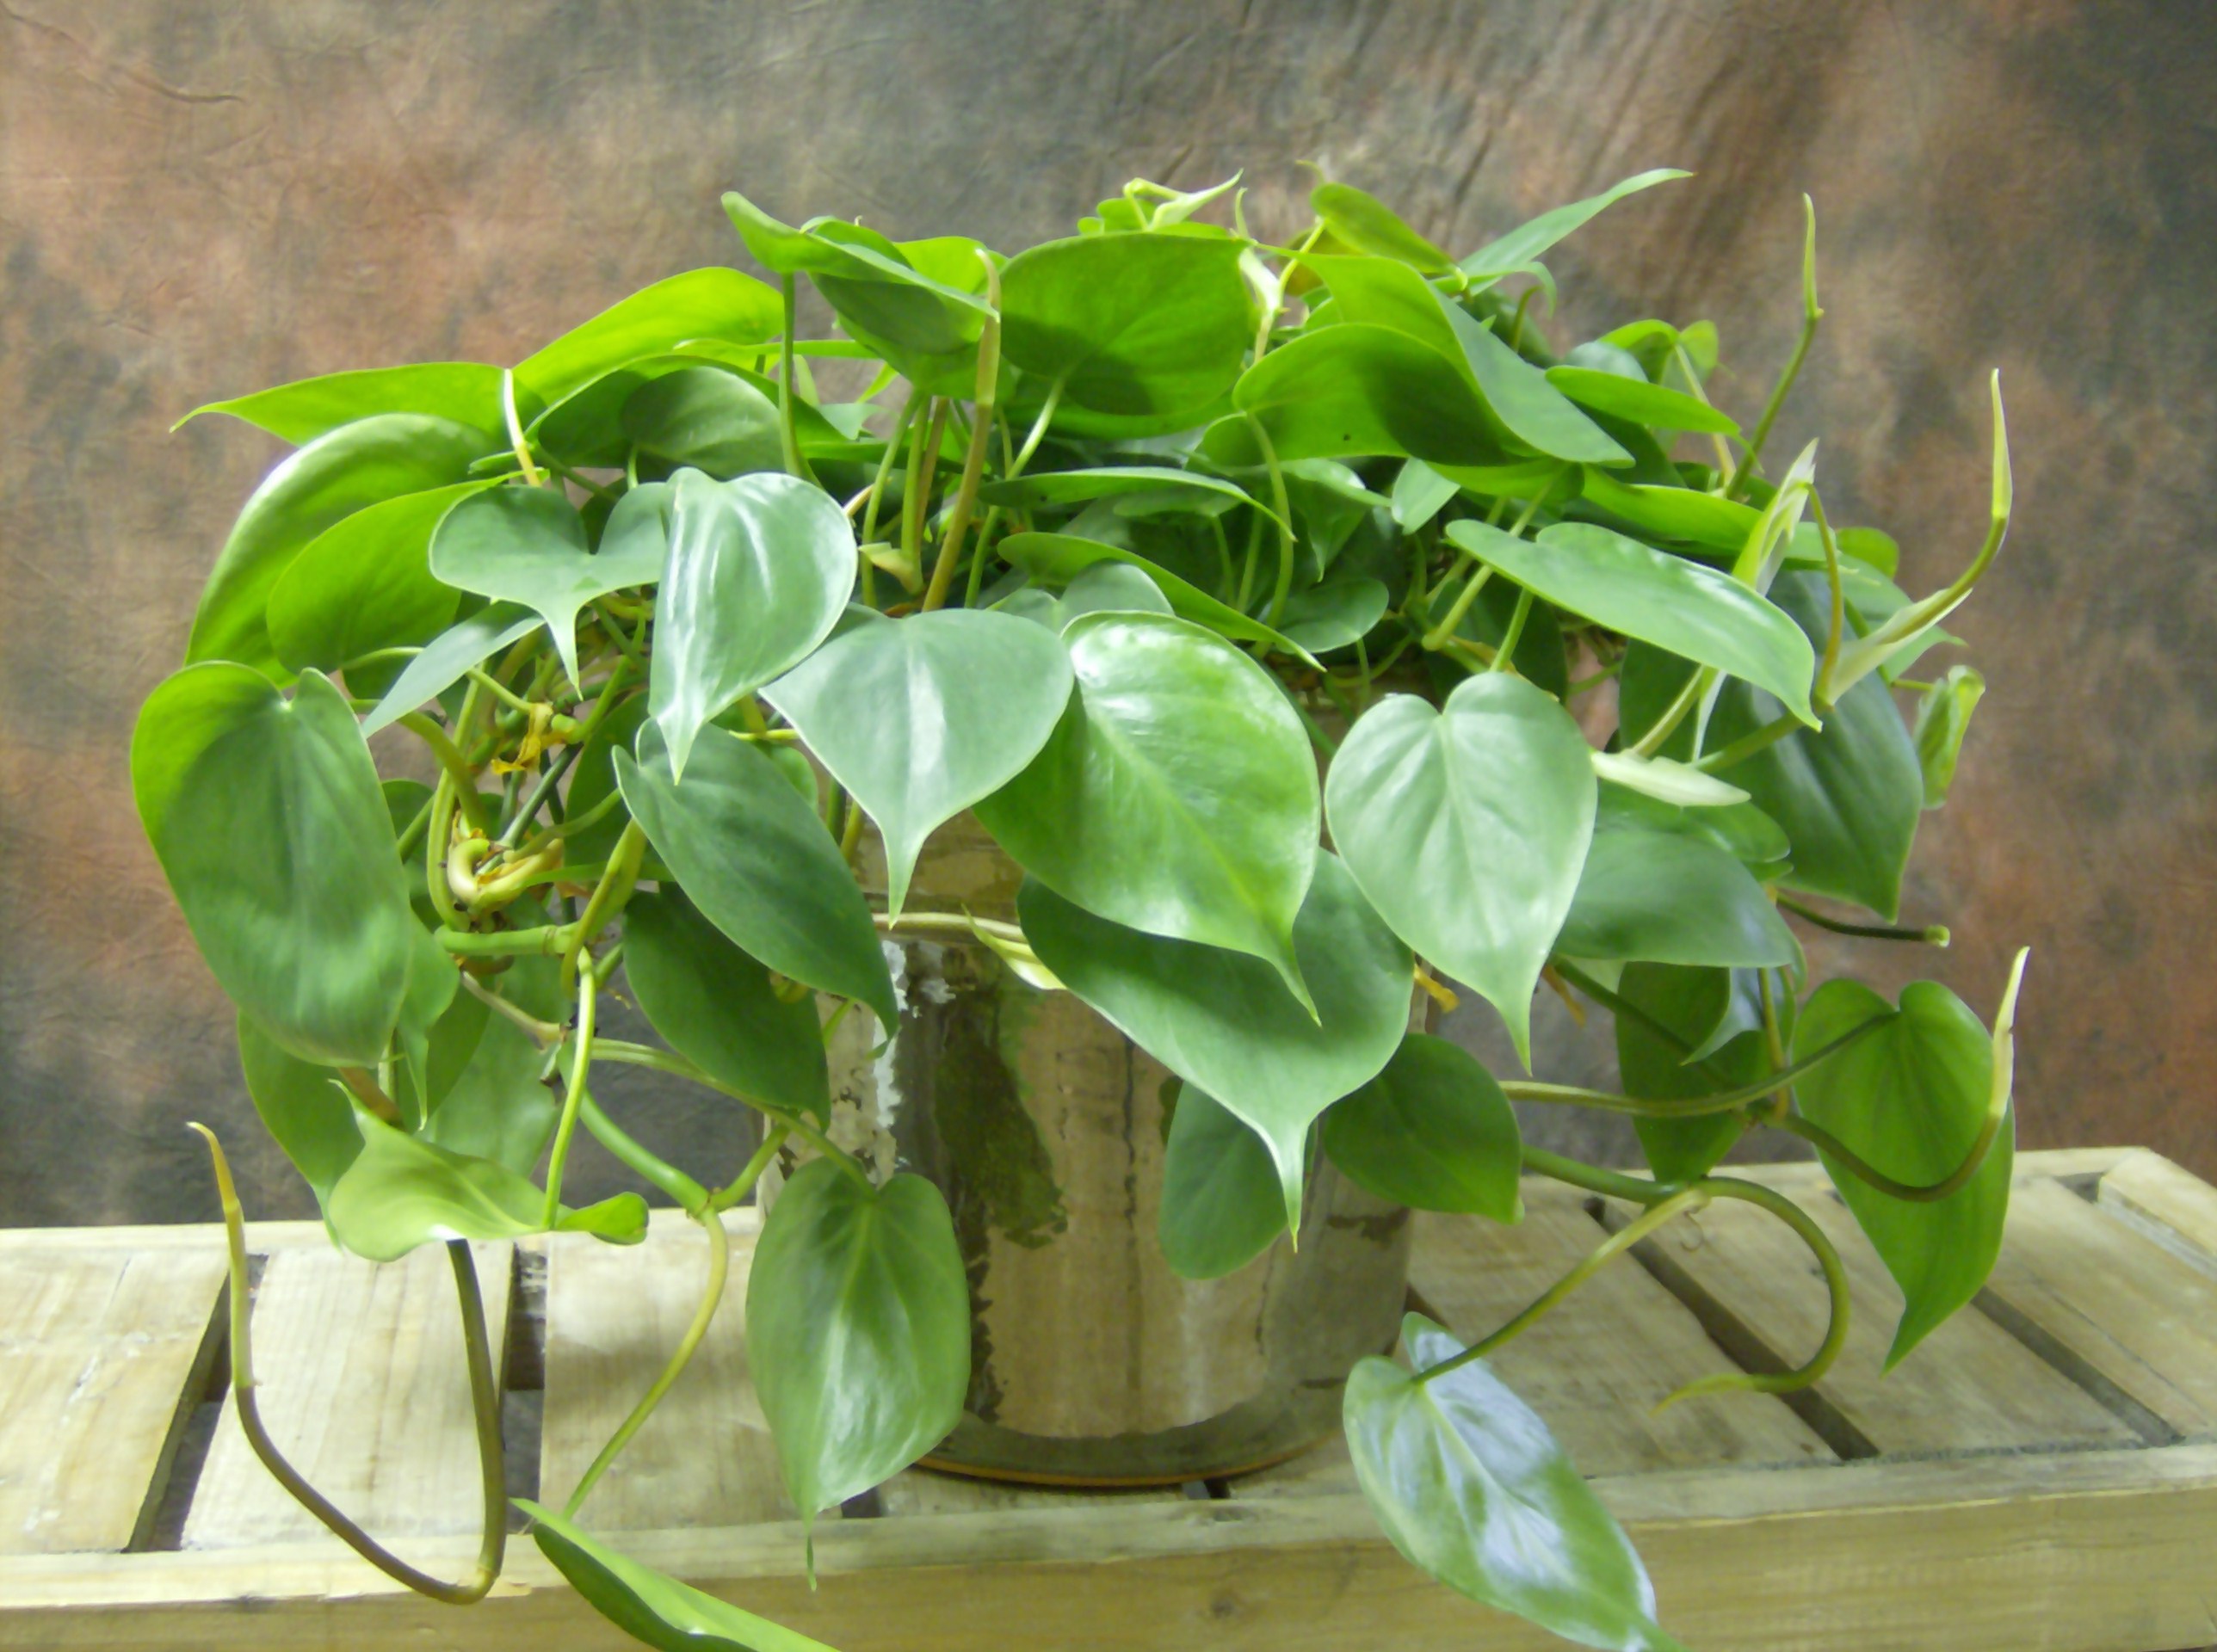 8 Poisonous Houseplants That Could Endanger Your Pets And Children | Stay At Home Mum